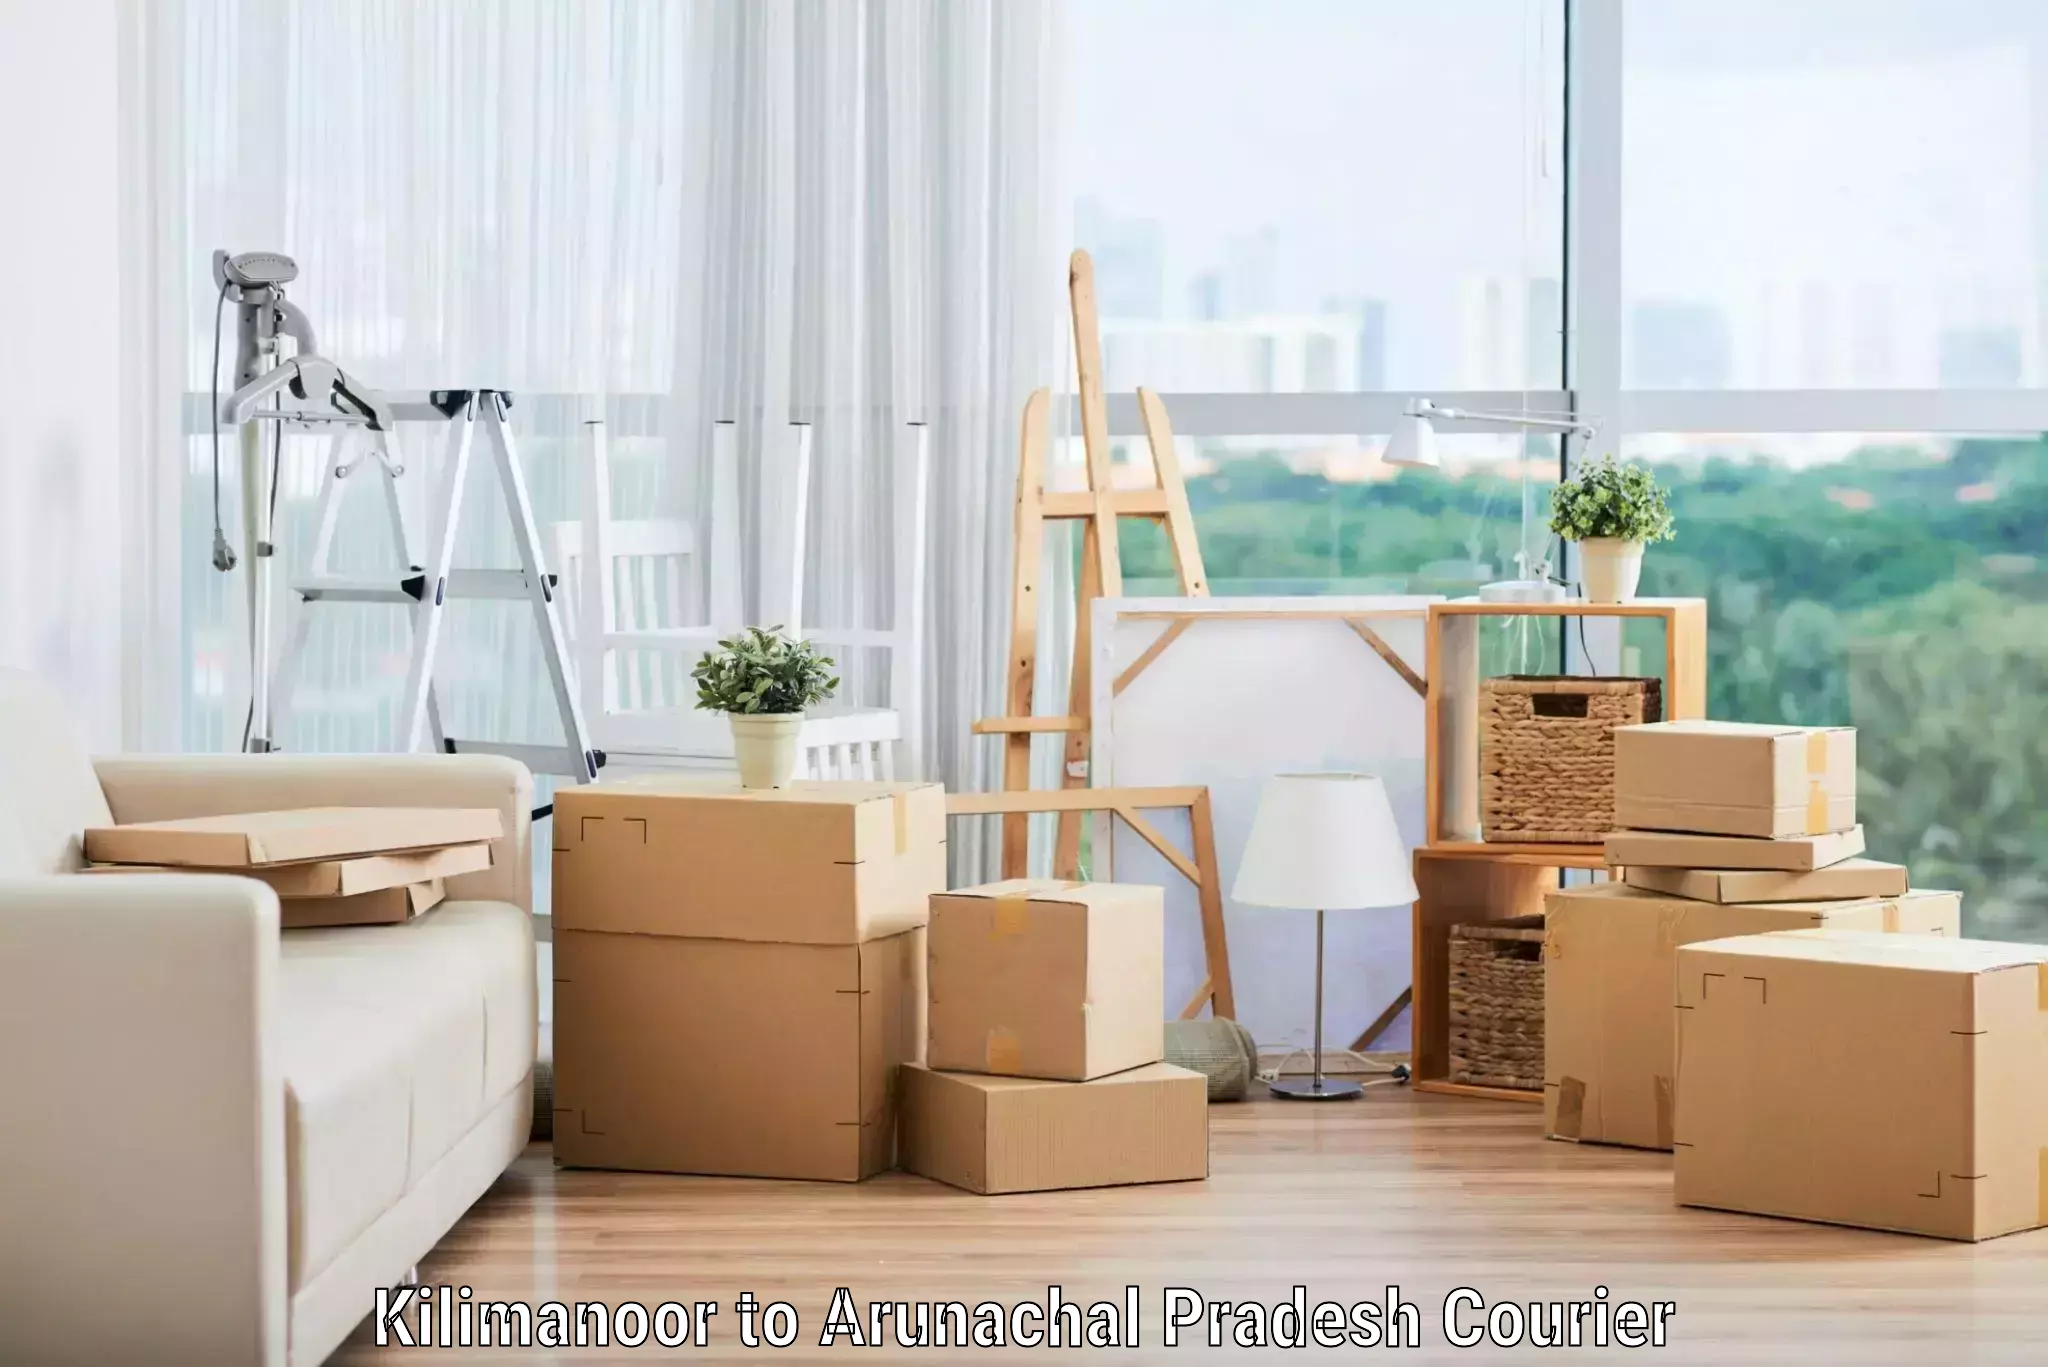 Trusted relocation experts Kilimanoor to Kurung Kumey